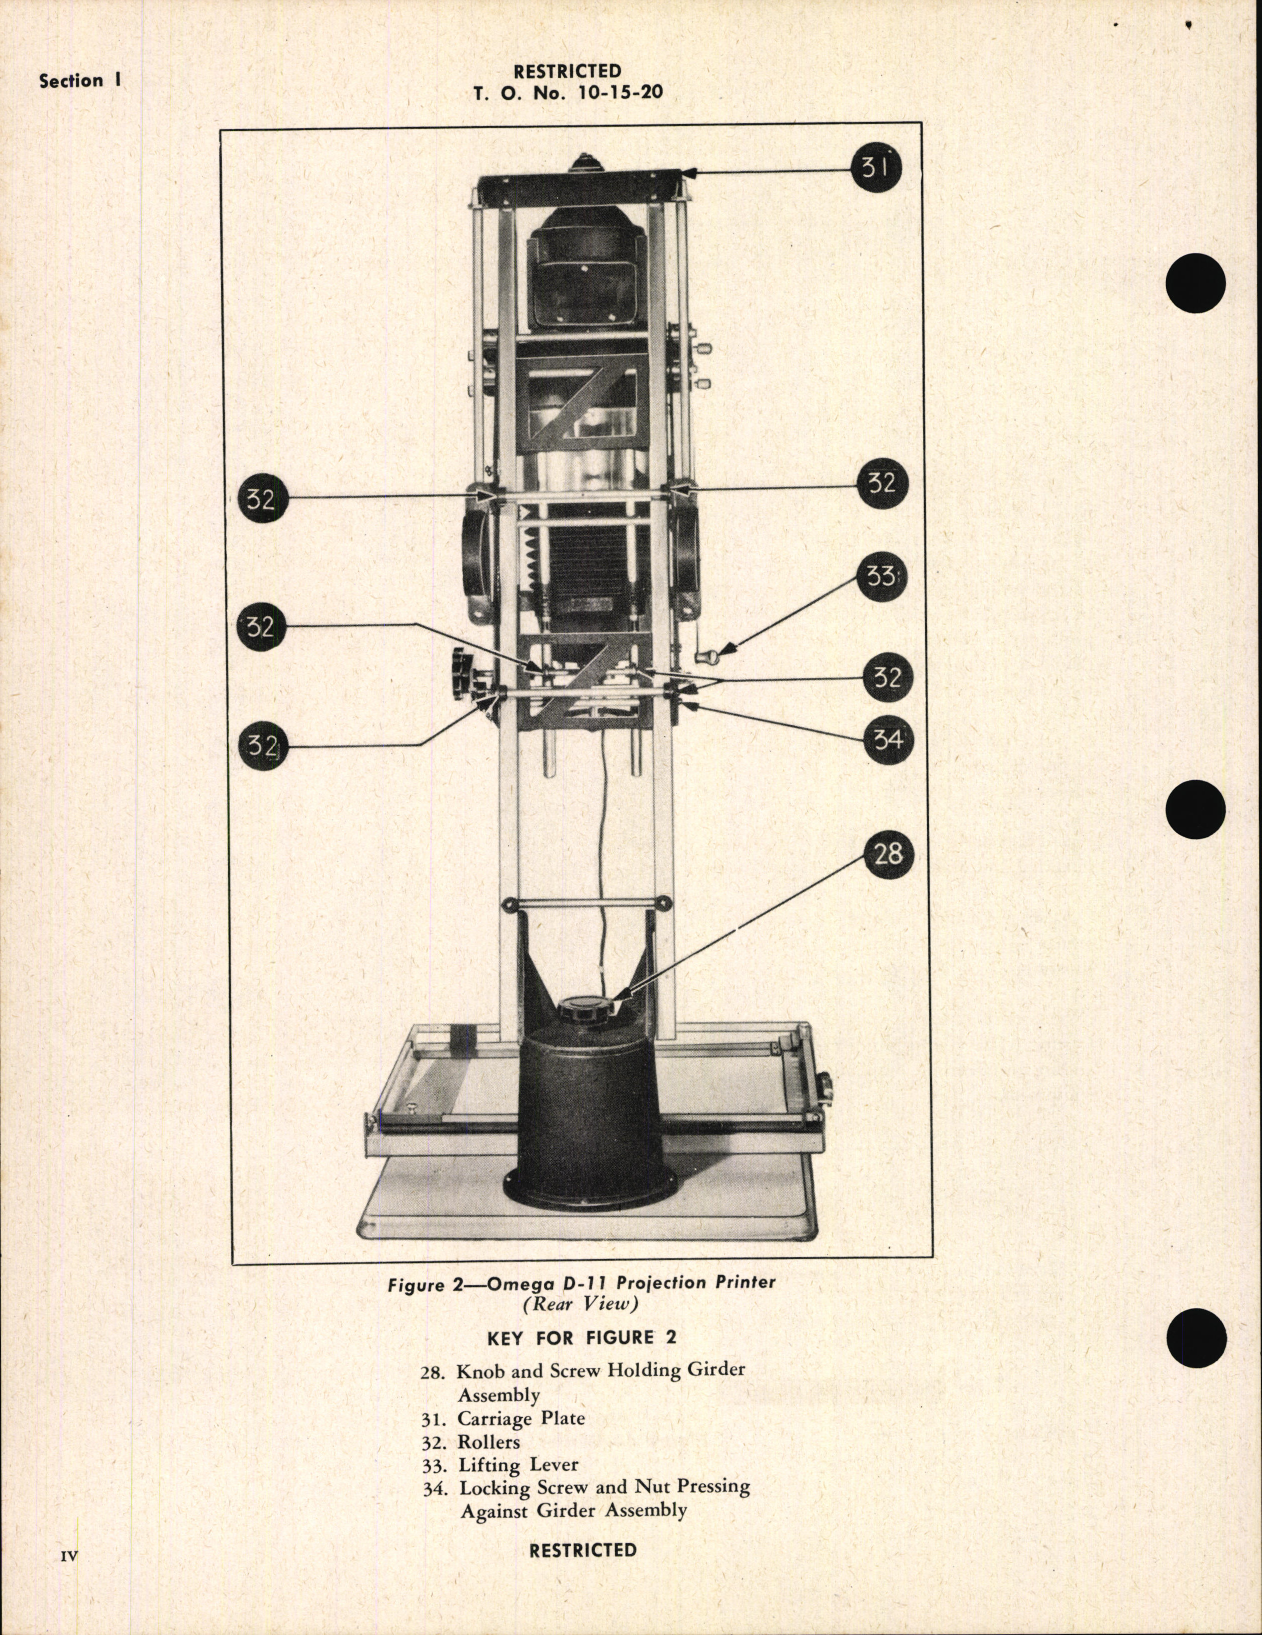 Sample page 6 from AirCorps Library document: Handbook of Instructions with Parts Catalog for Omega D-11 Projection Printer